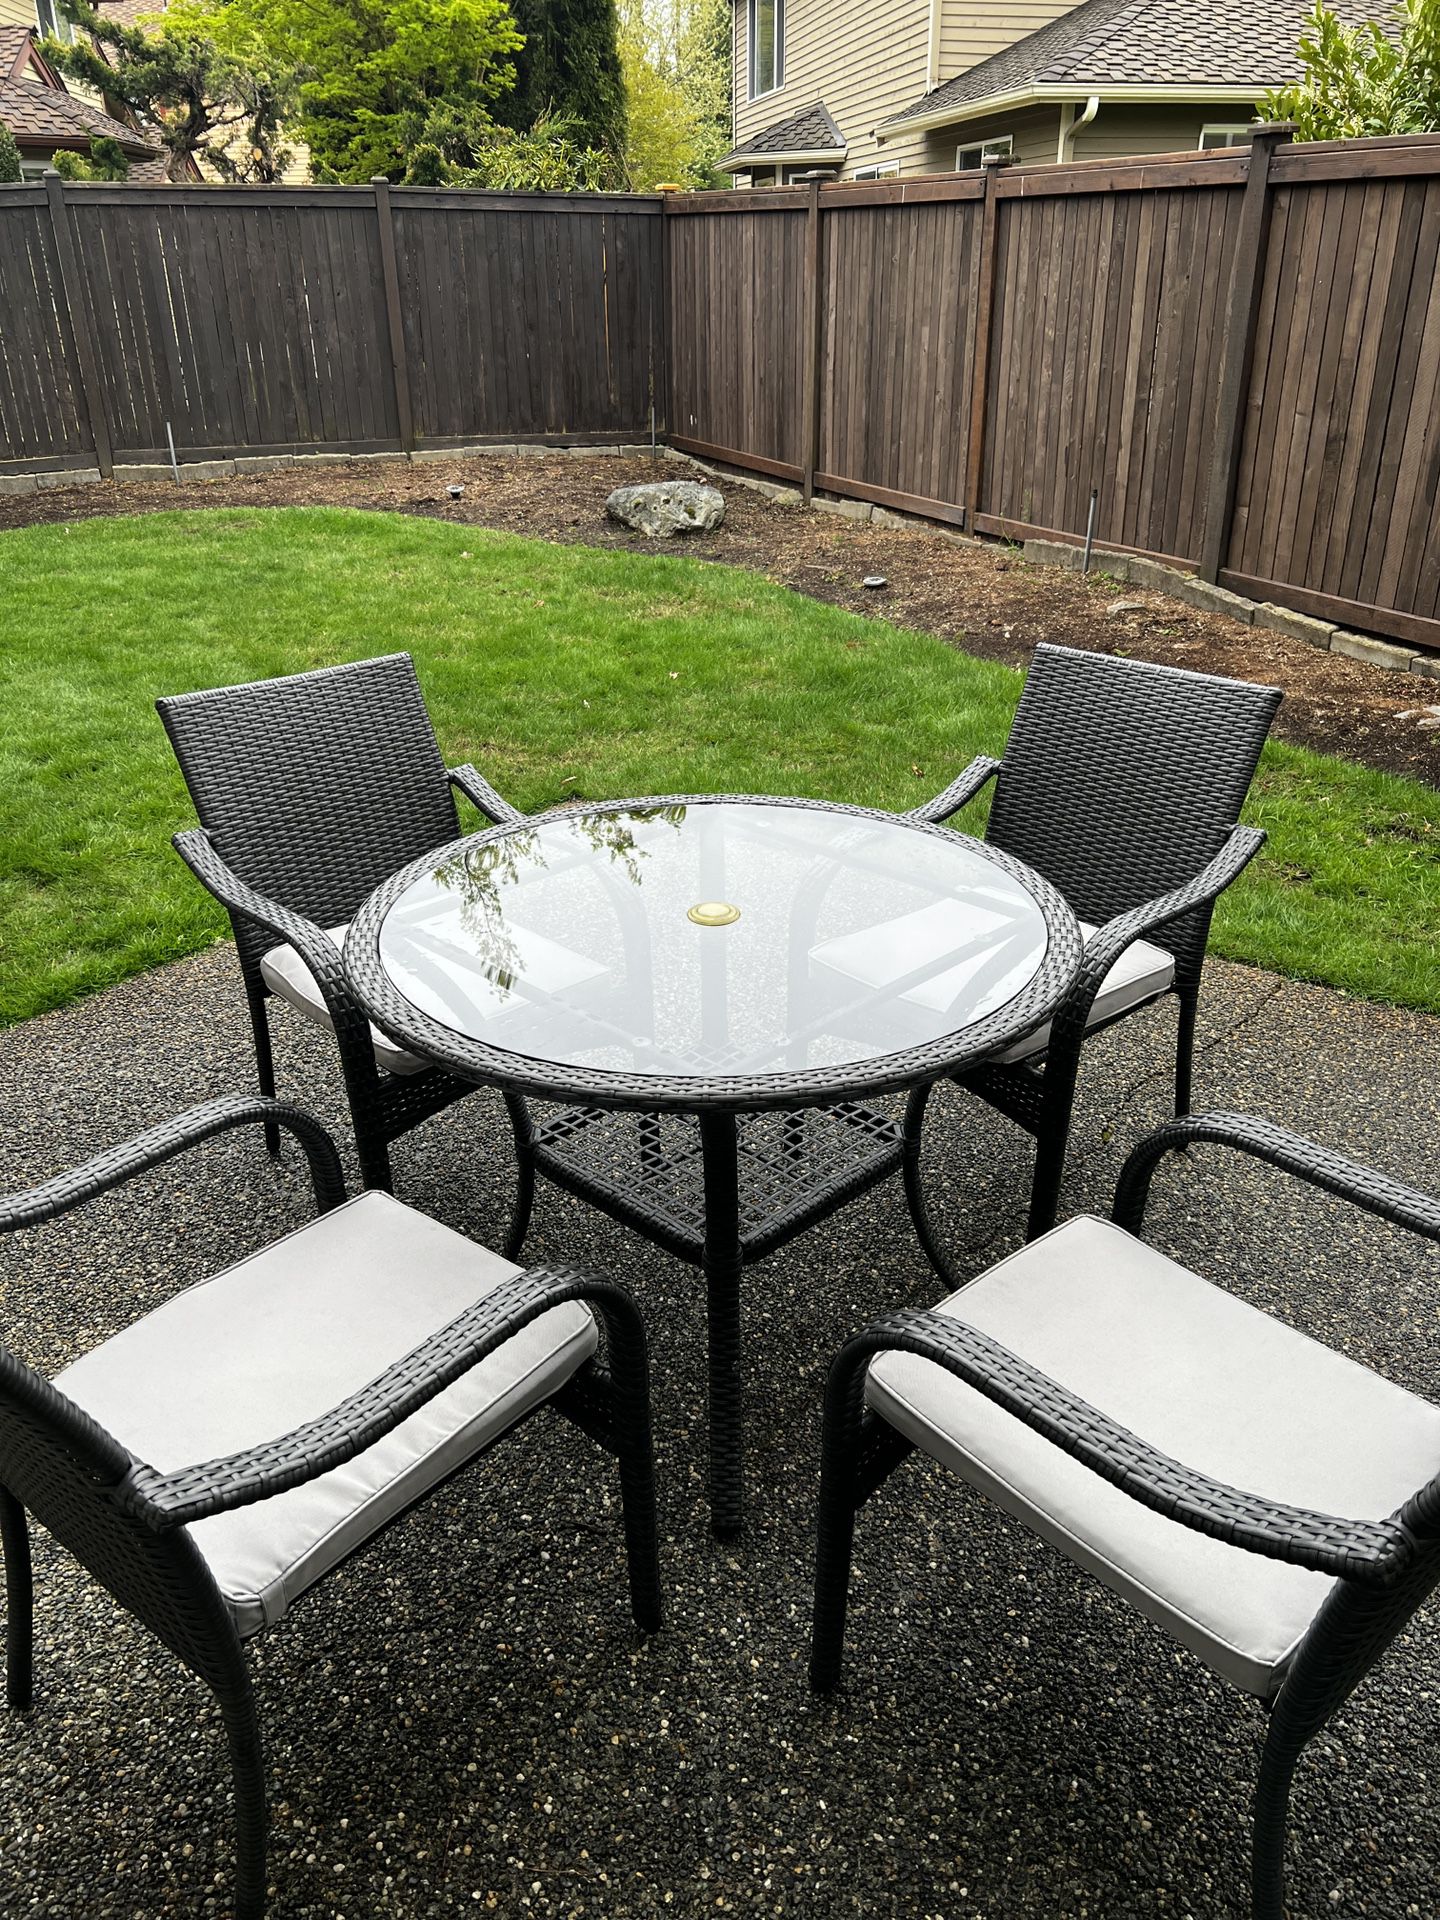 Patio Furniture Set - Comfy and Durable